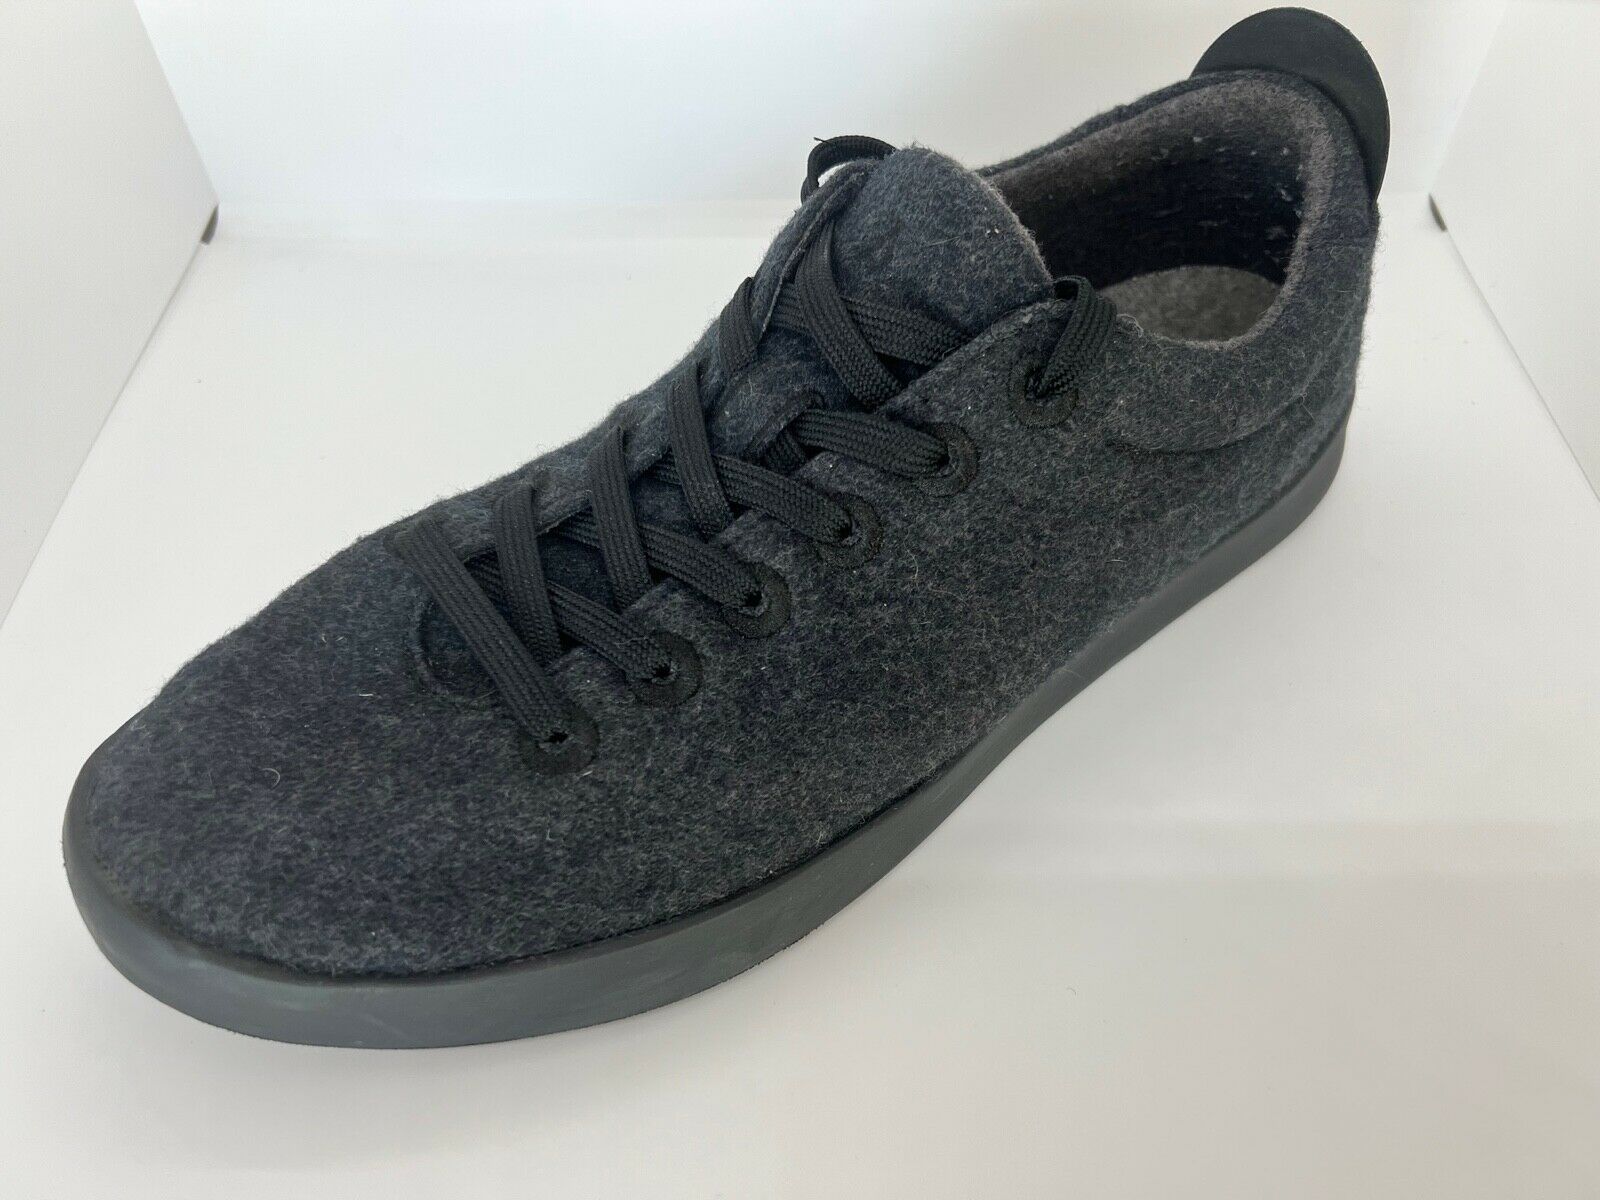 Primary image for Allbirds Men's Wool Pipers - Natural Black (Black Sole) - 12 EUC